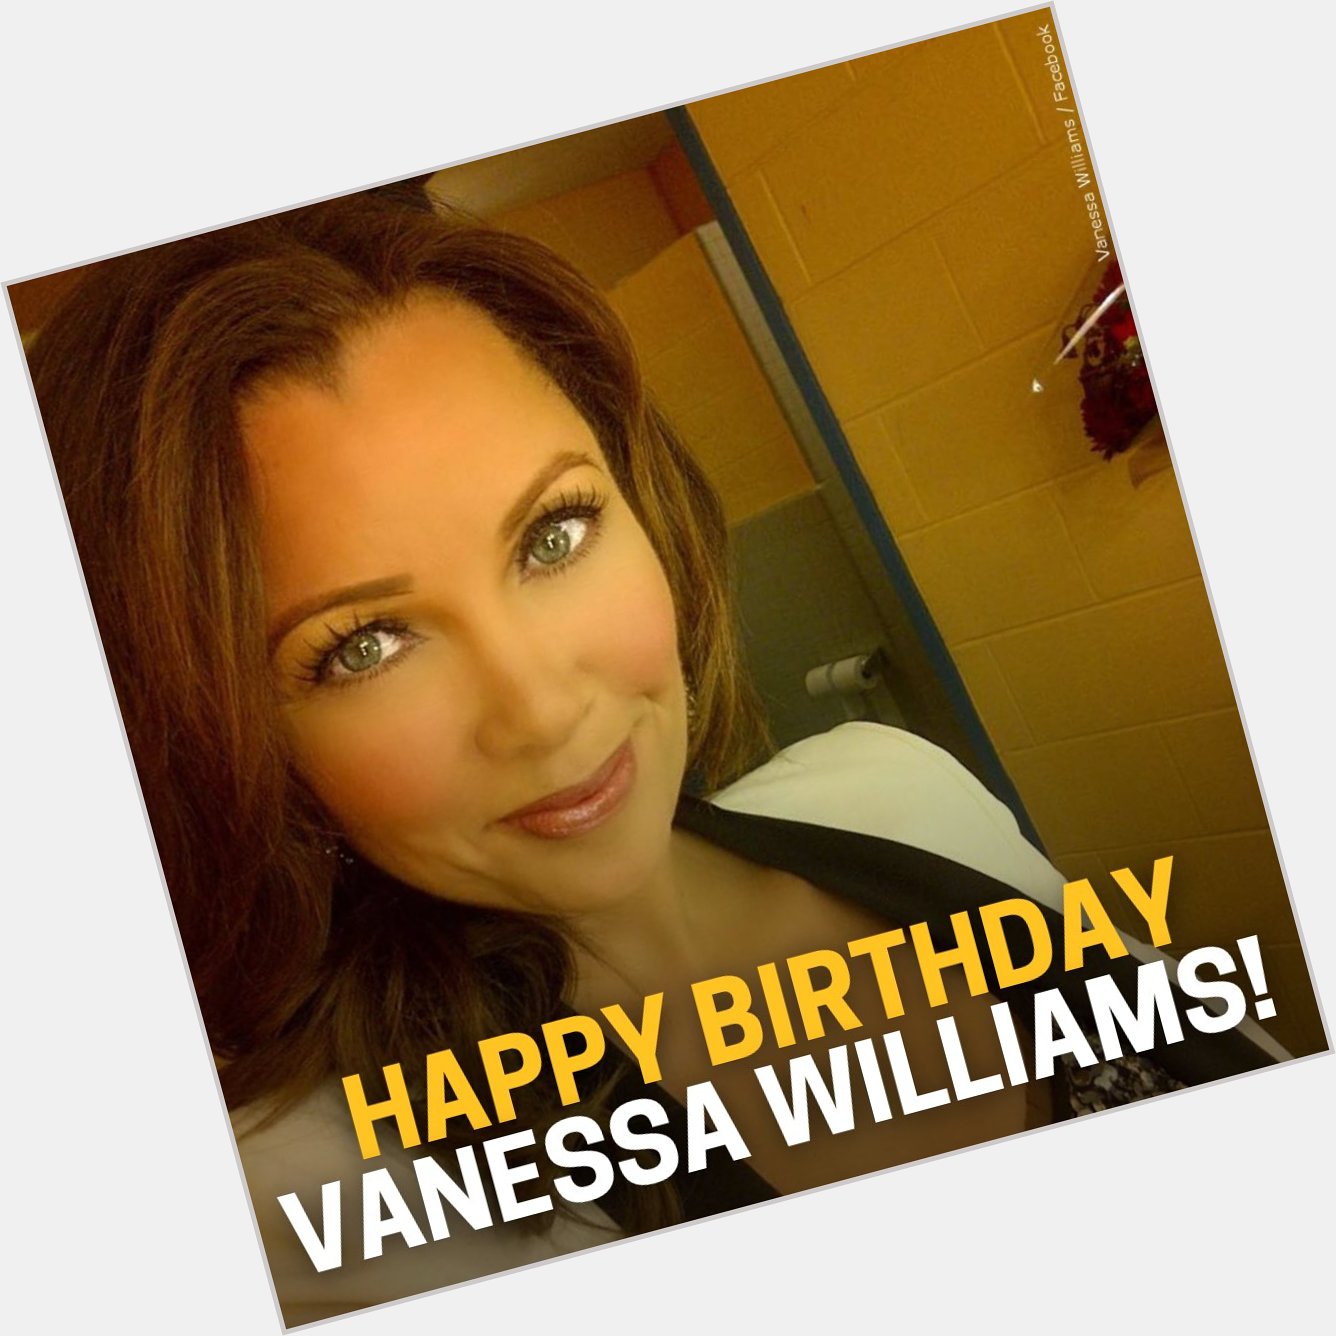 Happy Birthday, Vanessa Williams! The former Miss America winner and actress turned 60 today! 